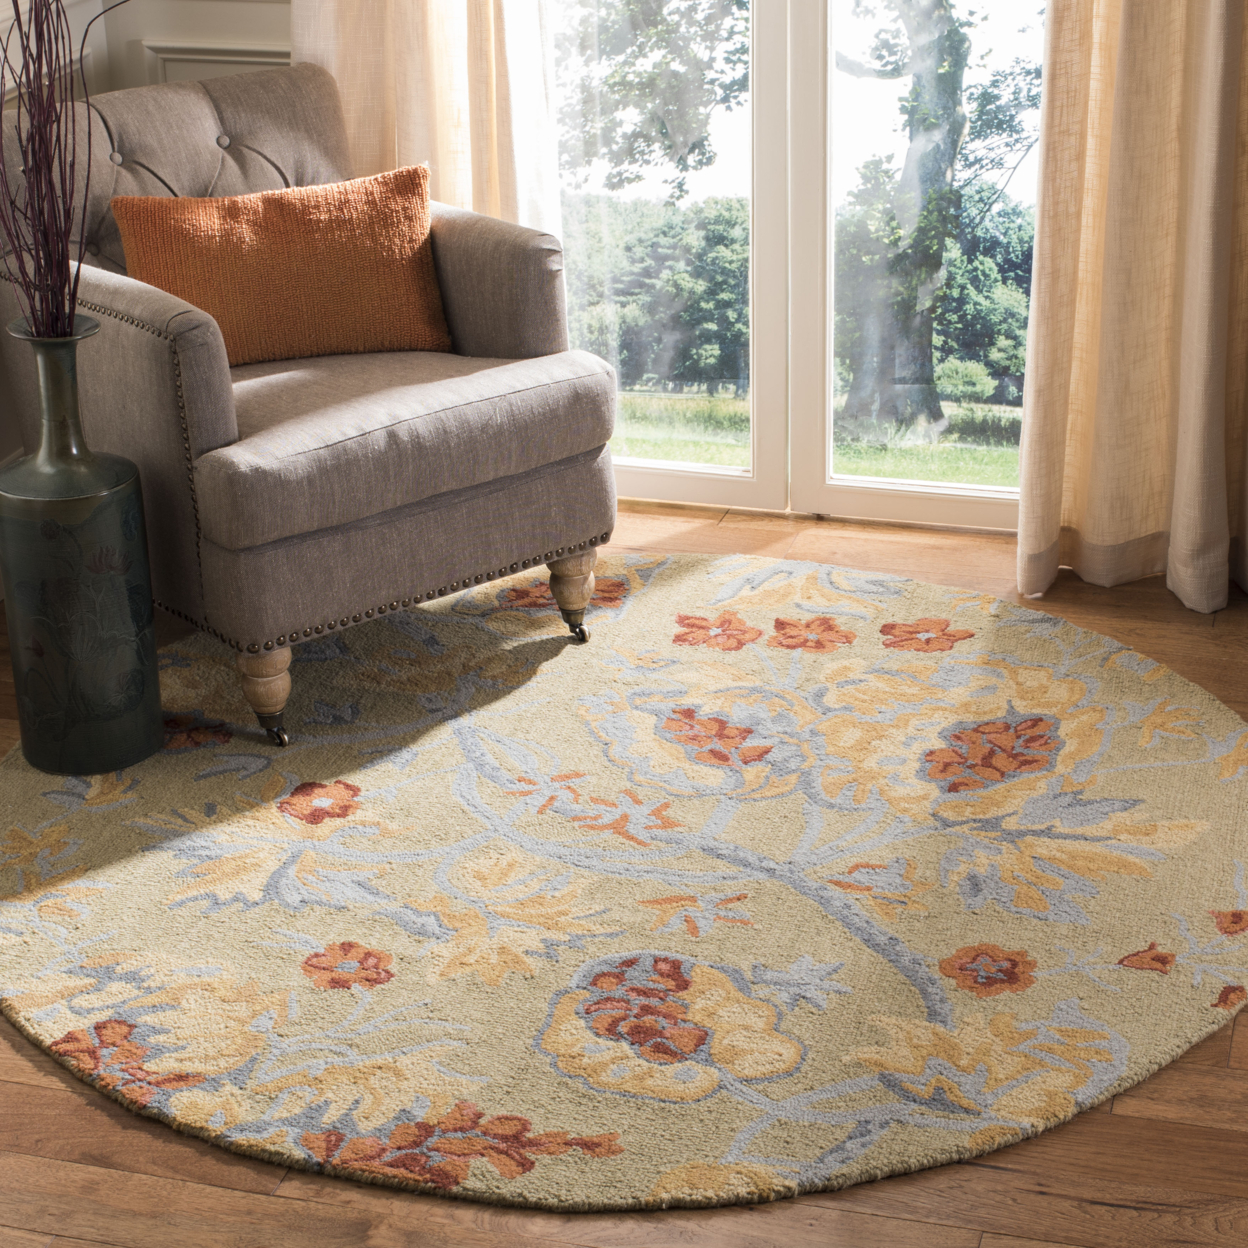 SAFAVIEH Blossom BLM922A Hand-hooked Beige / Multi Rug - 4' X 6'